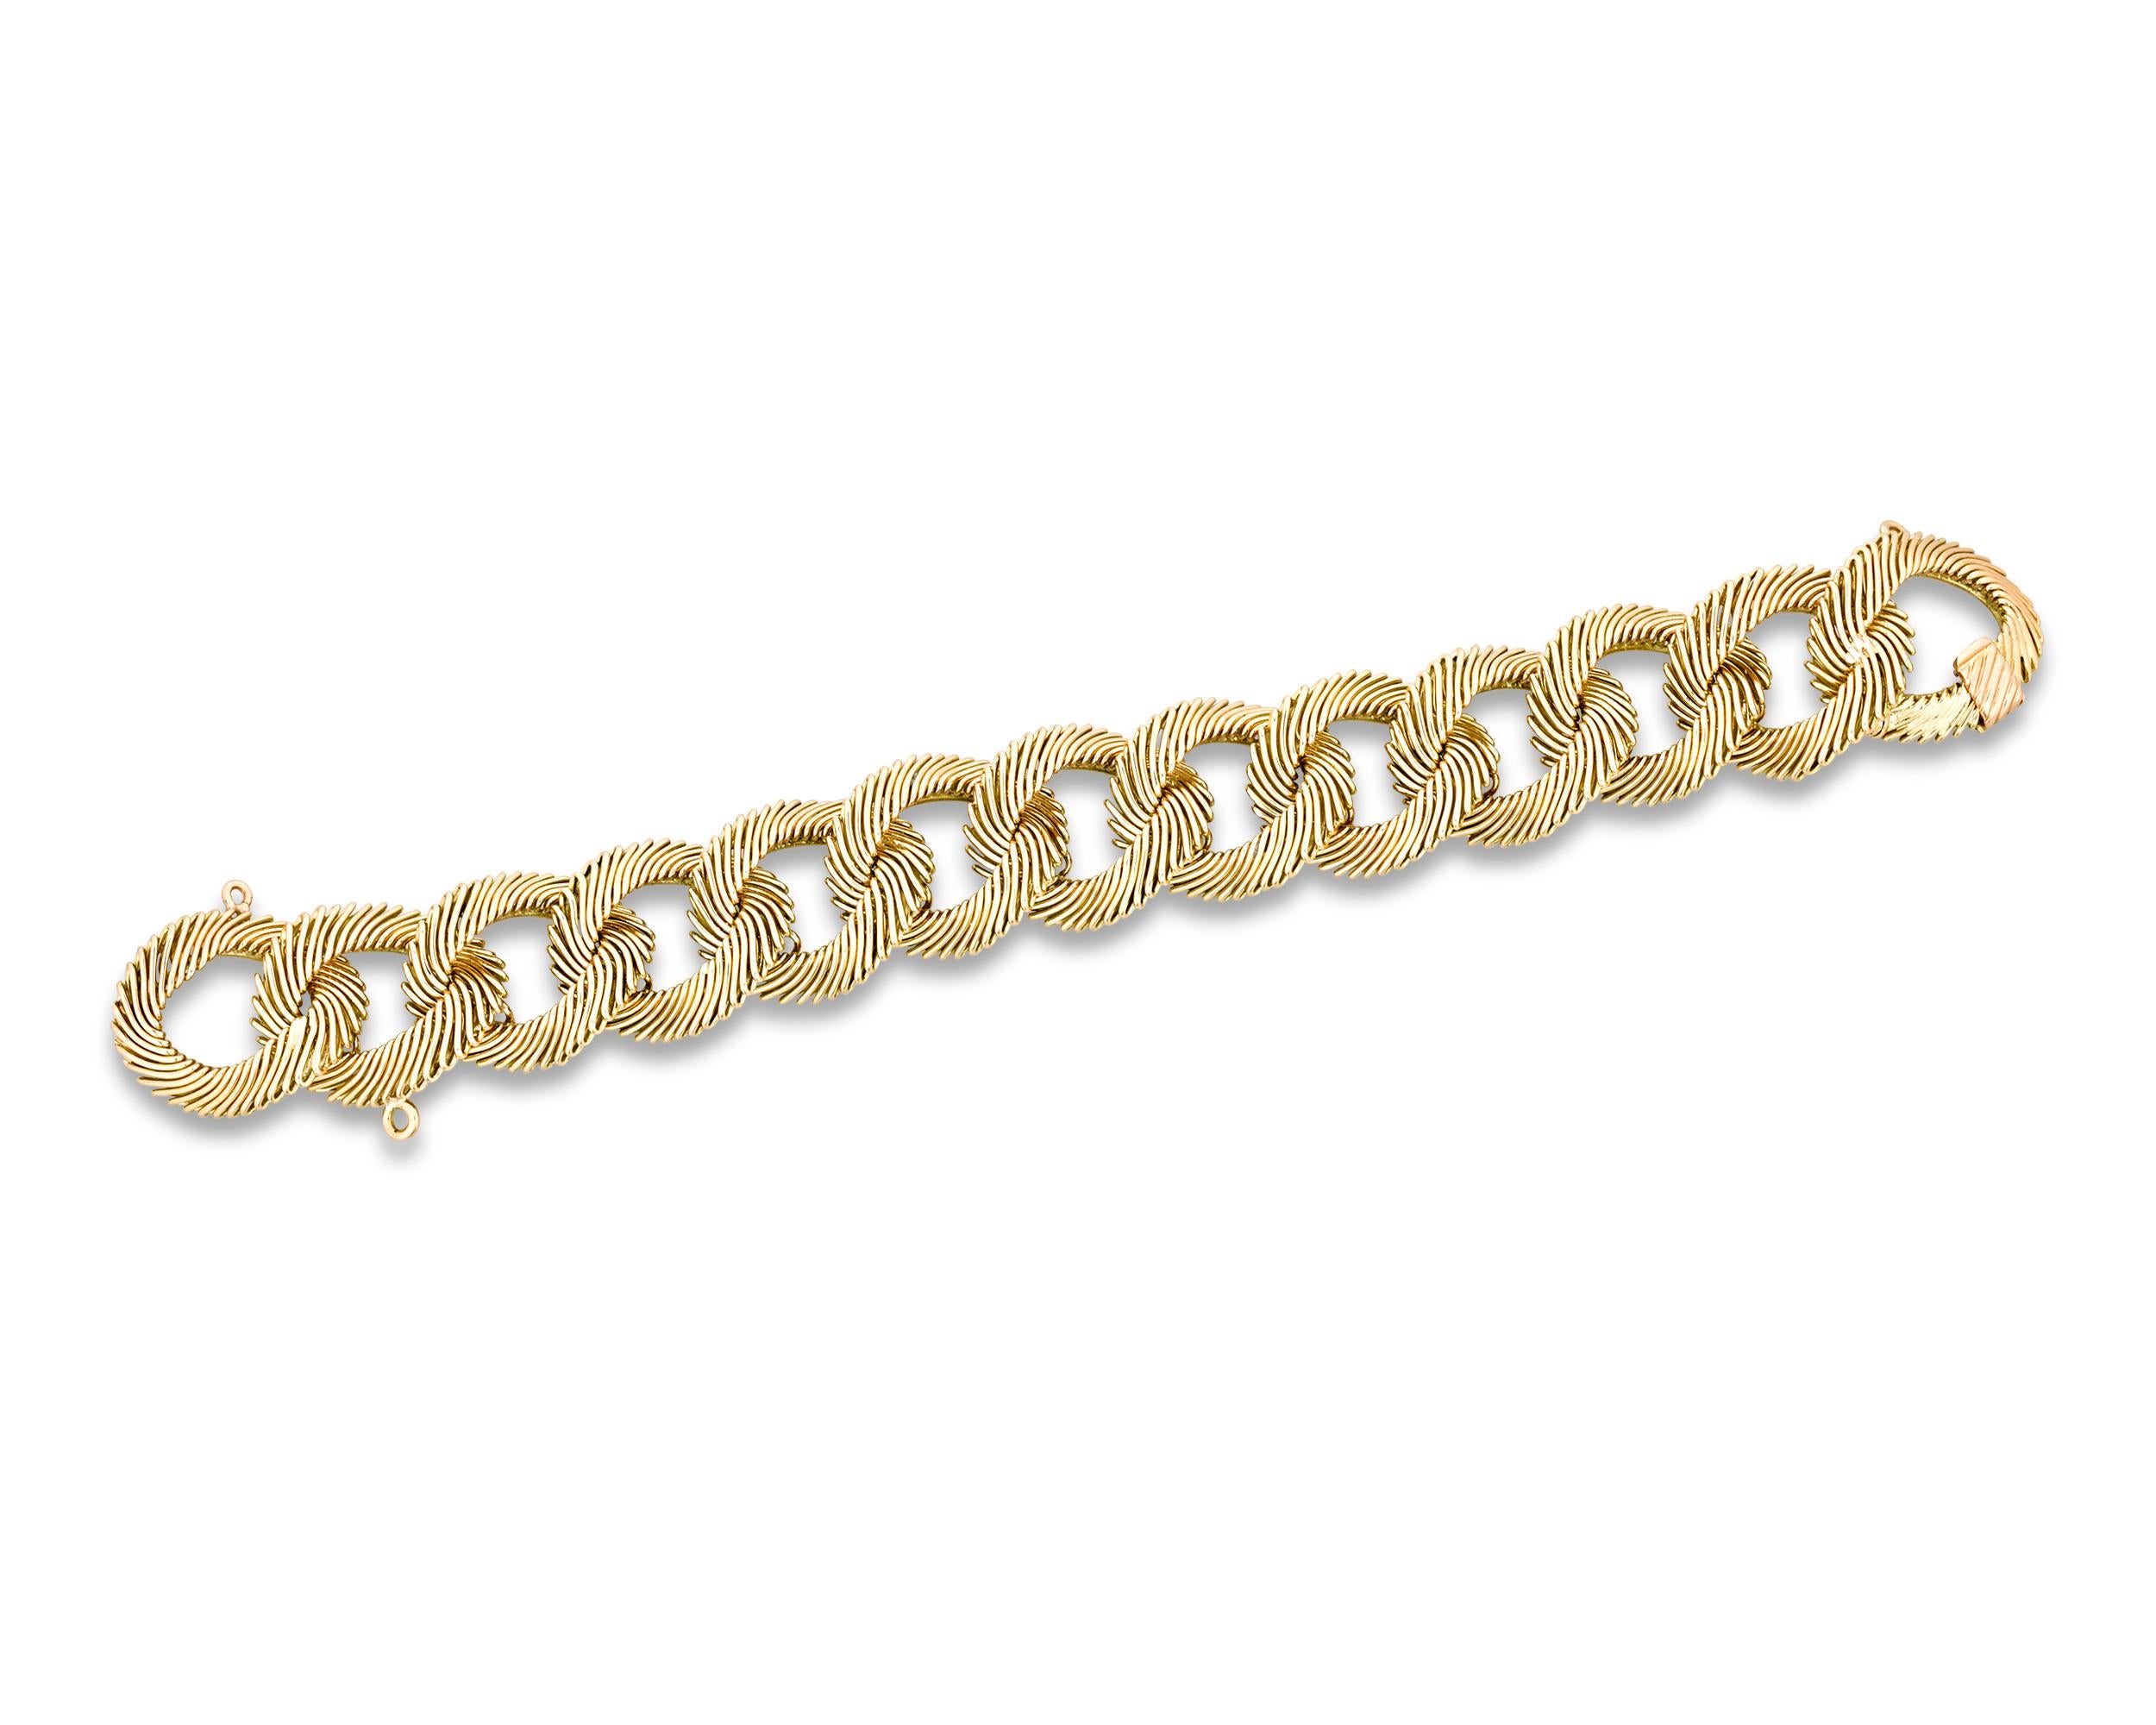 This vintage gold link bracelet by the legendary jewelry house Van Cleef & Arpels is part of the firm's highly unique Cheveaux d'ange, or 